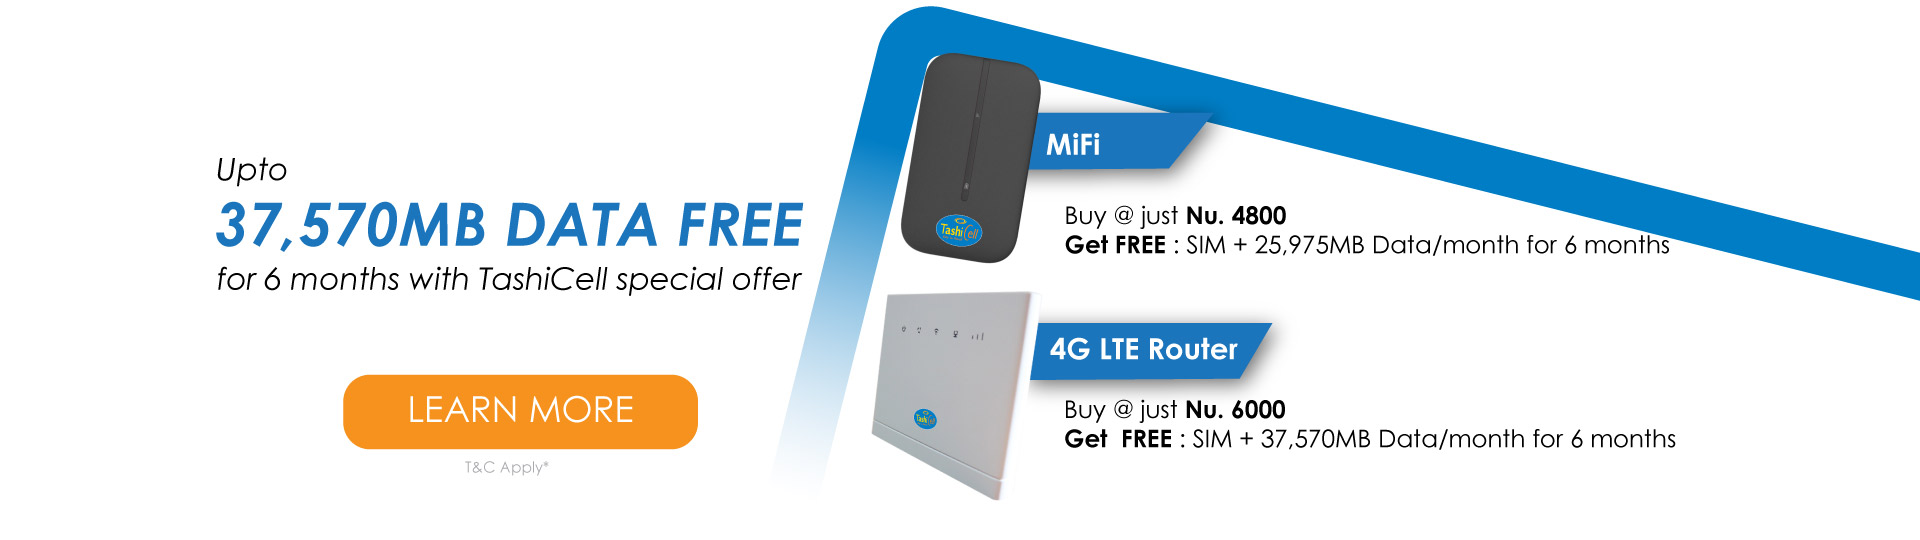 Mifi Package